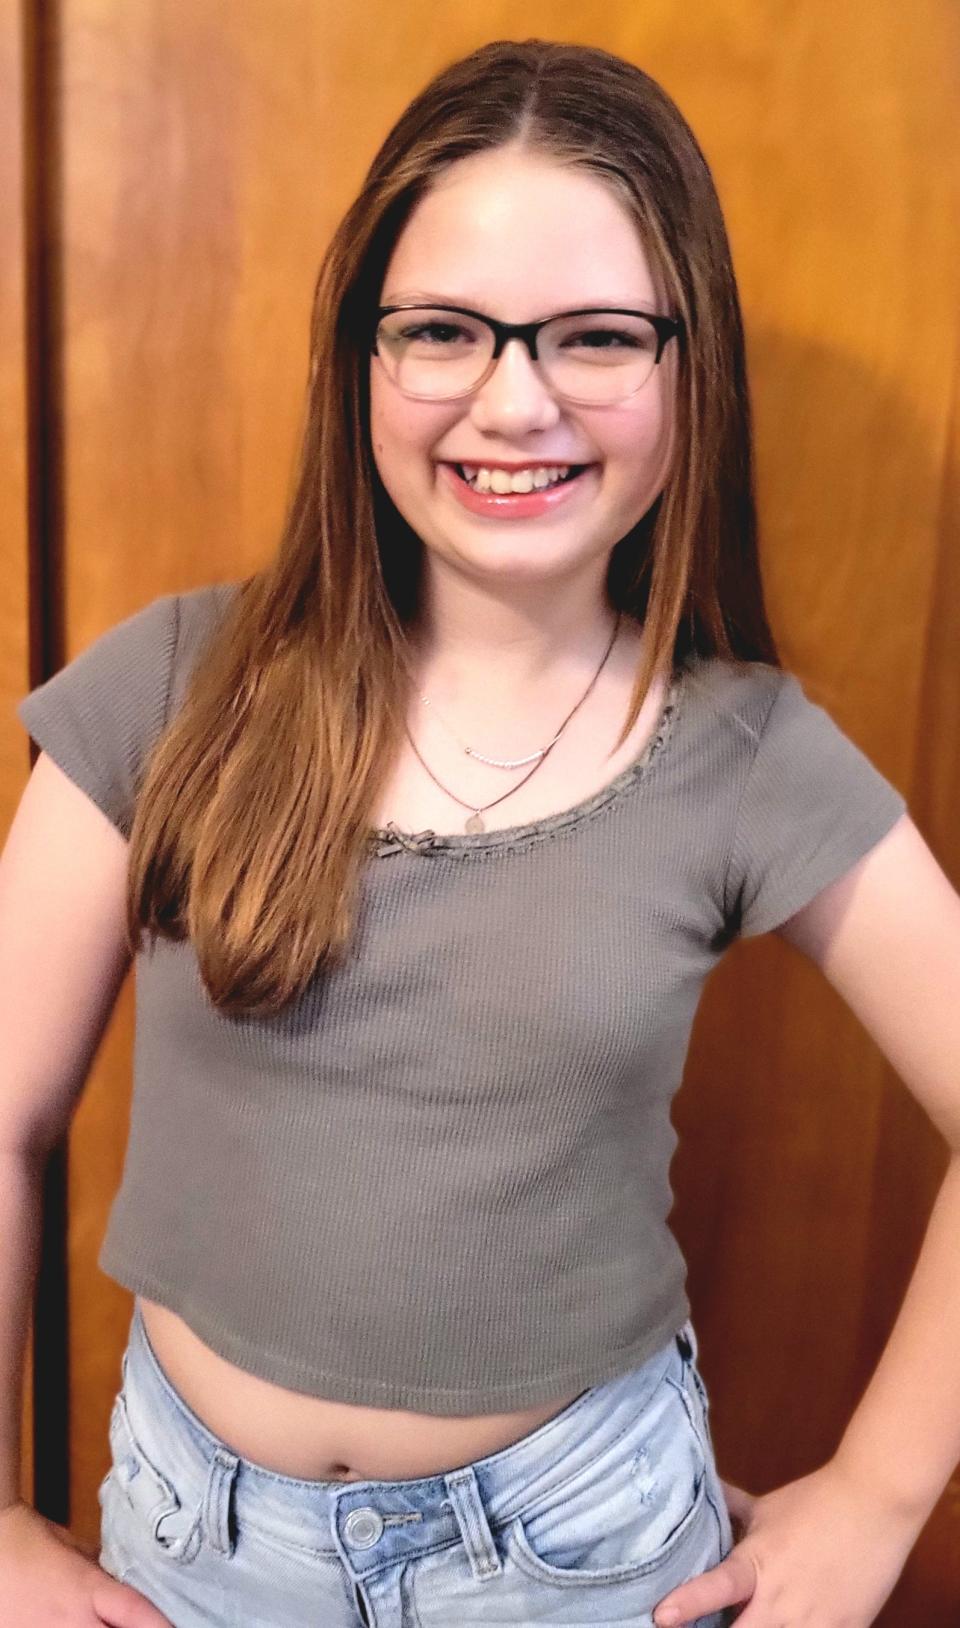 June Rickman, a sixth-grader at Fernwood Montessori, won second place in the Grade 6 category of the 41st Martin Luther King Jr. Essay contest, announced in January 2024.